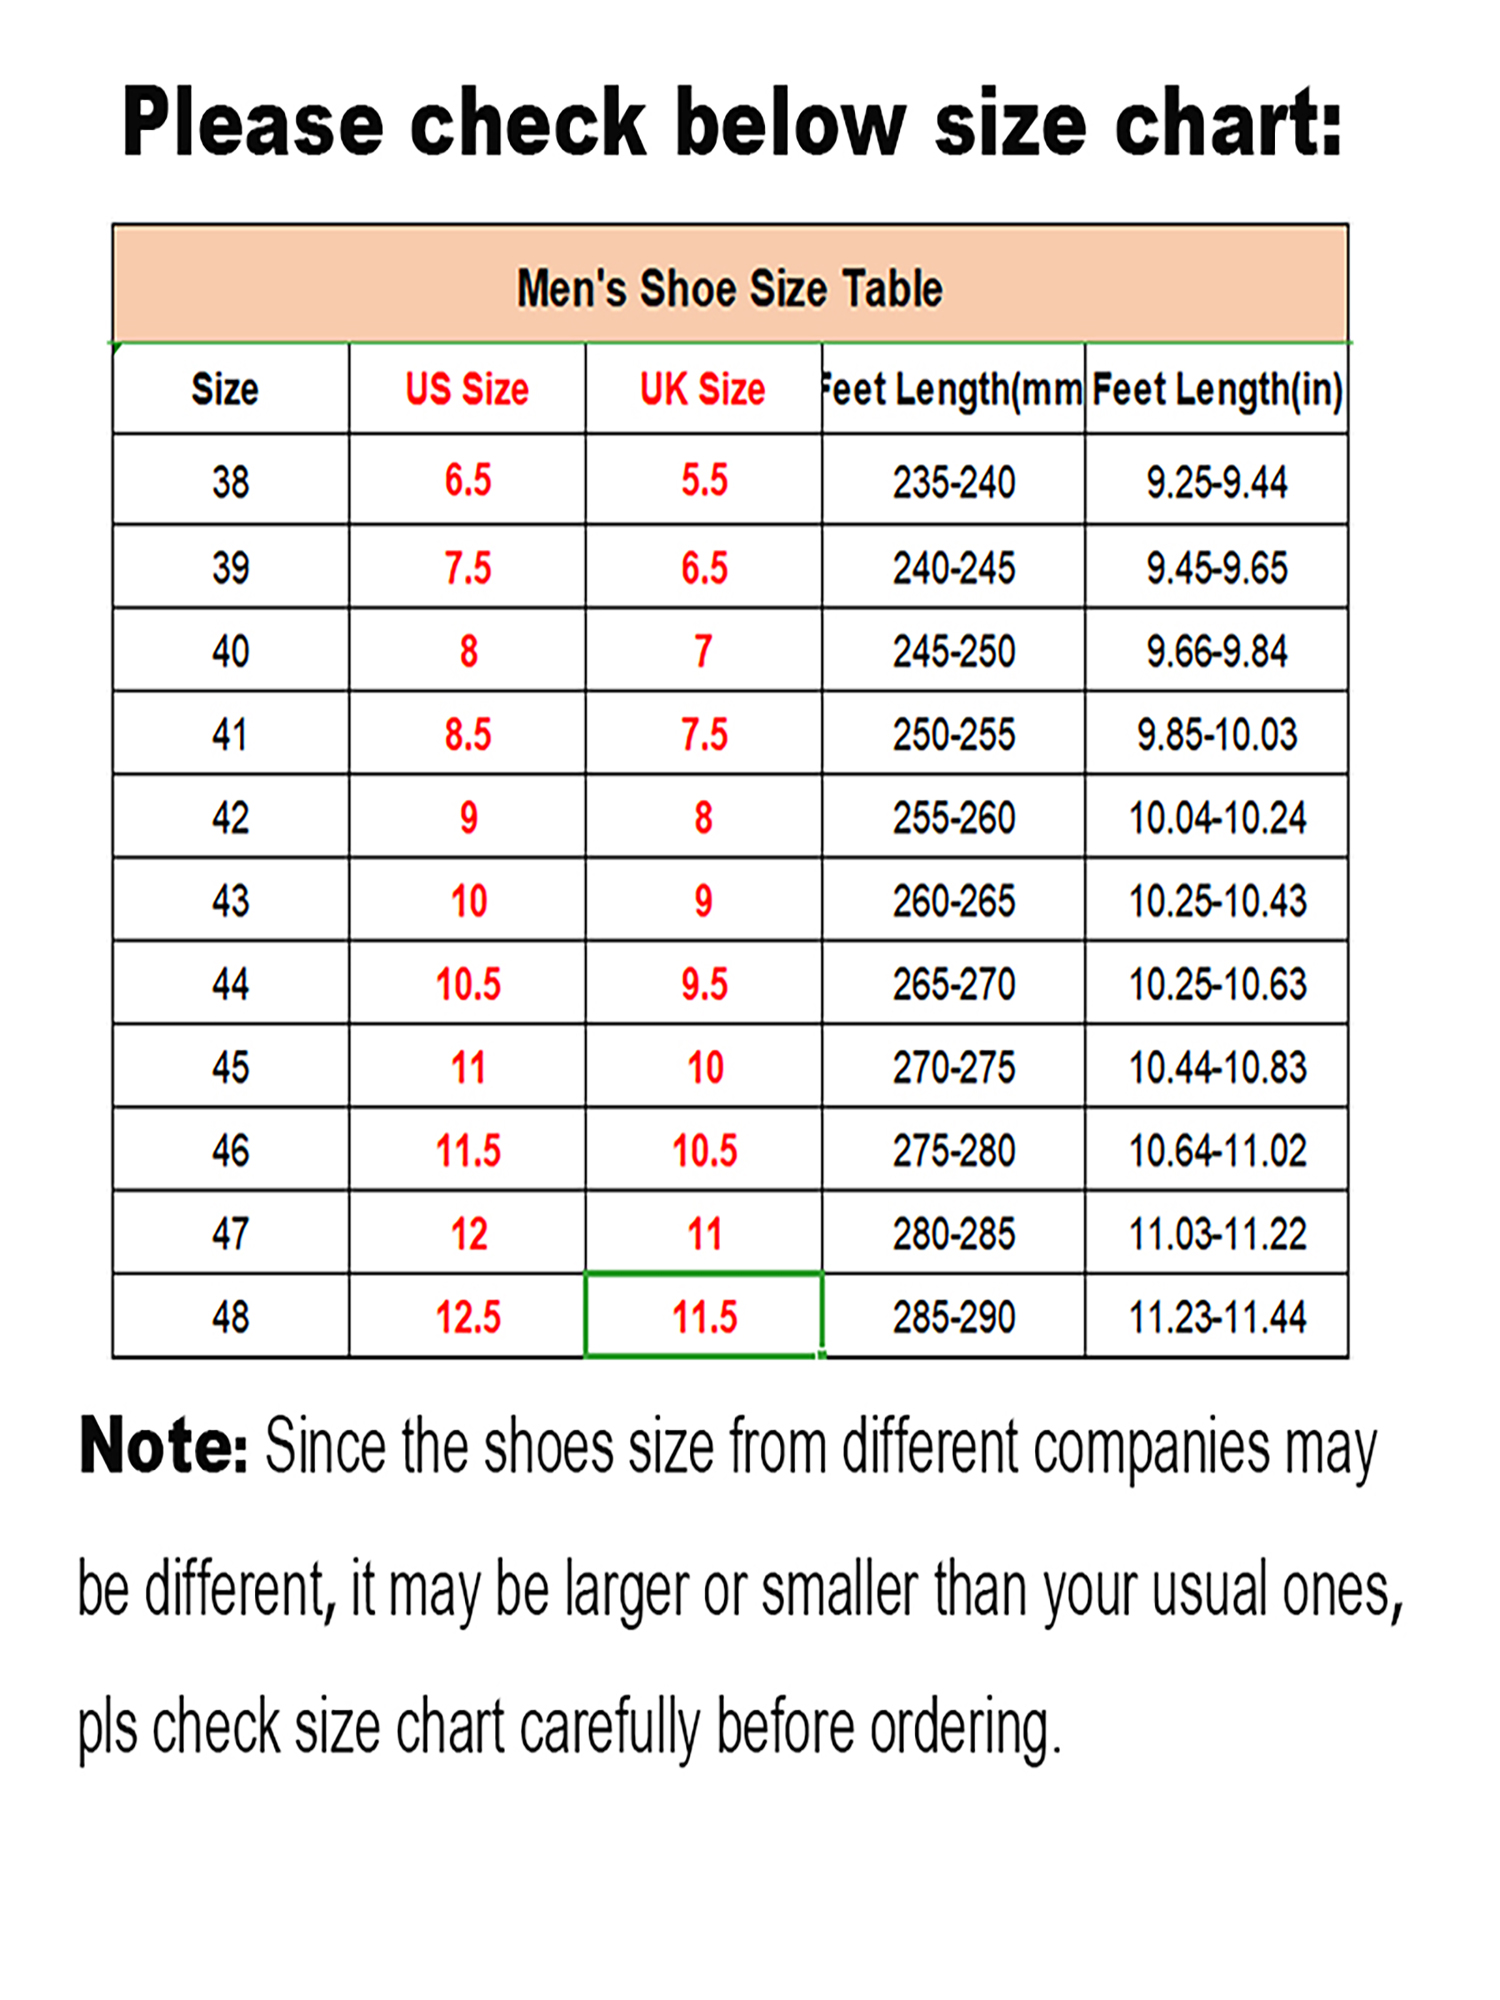 Avamo Mens Ankle Boots, Men's Casual Shoes Zipper Hand Stitching Booties Breathable Non Slip Outdoor Shoes Size 6.5-12.5 - image 2 of 3